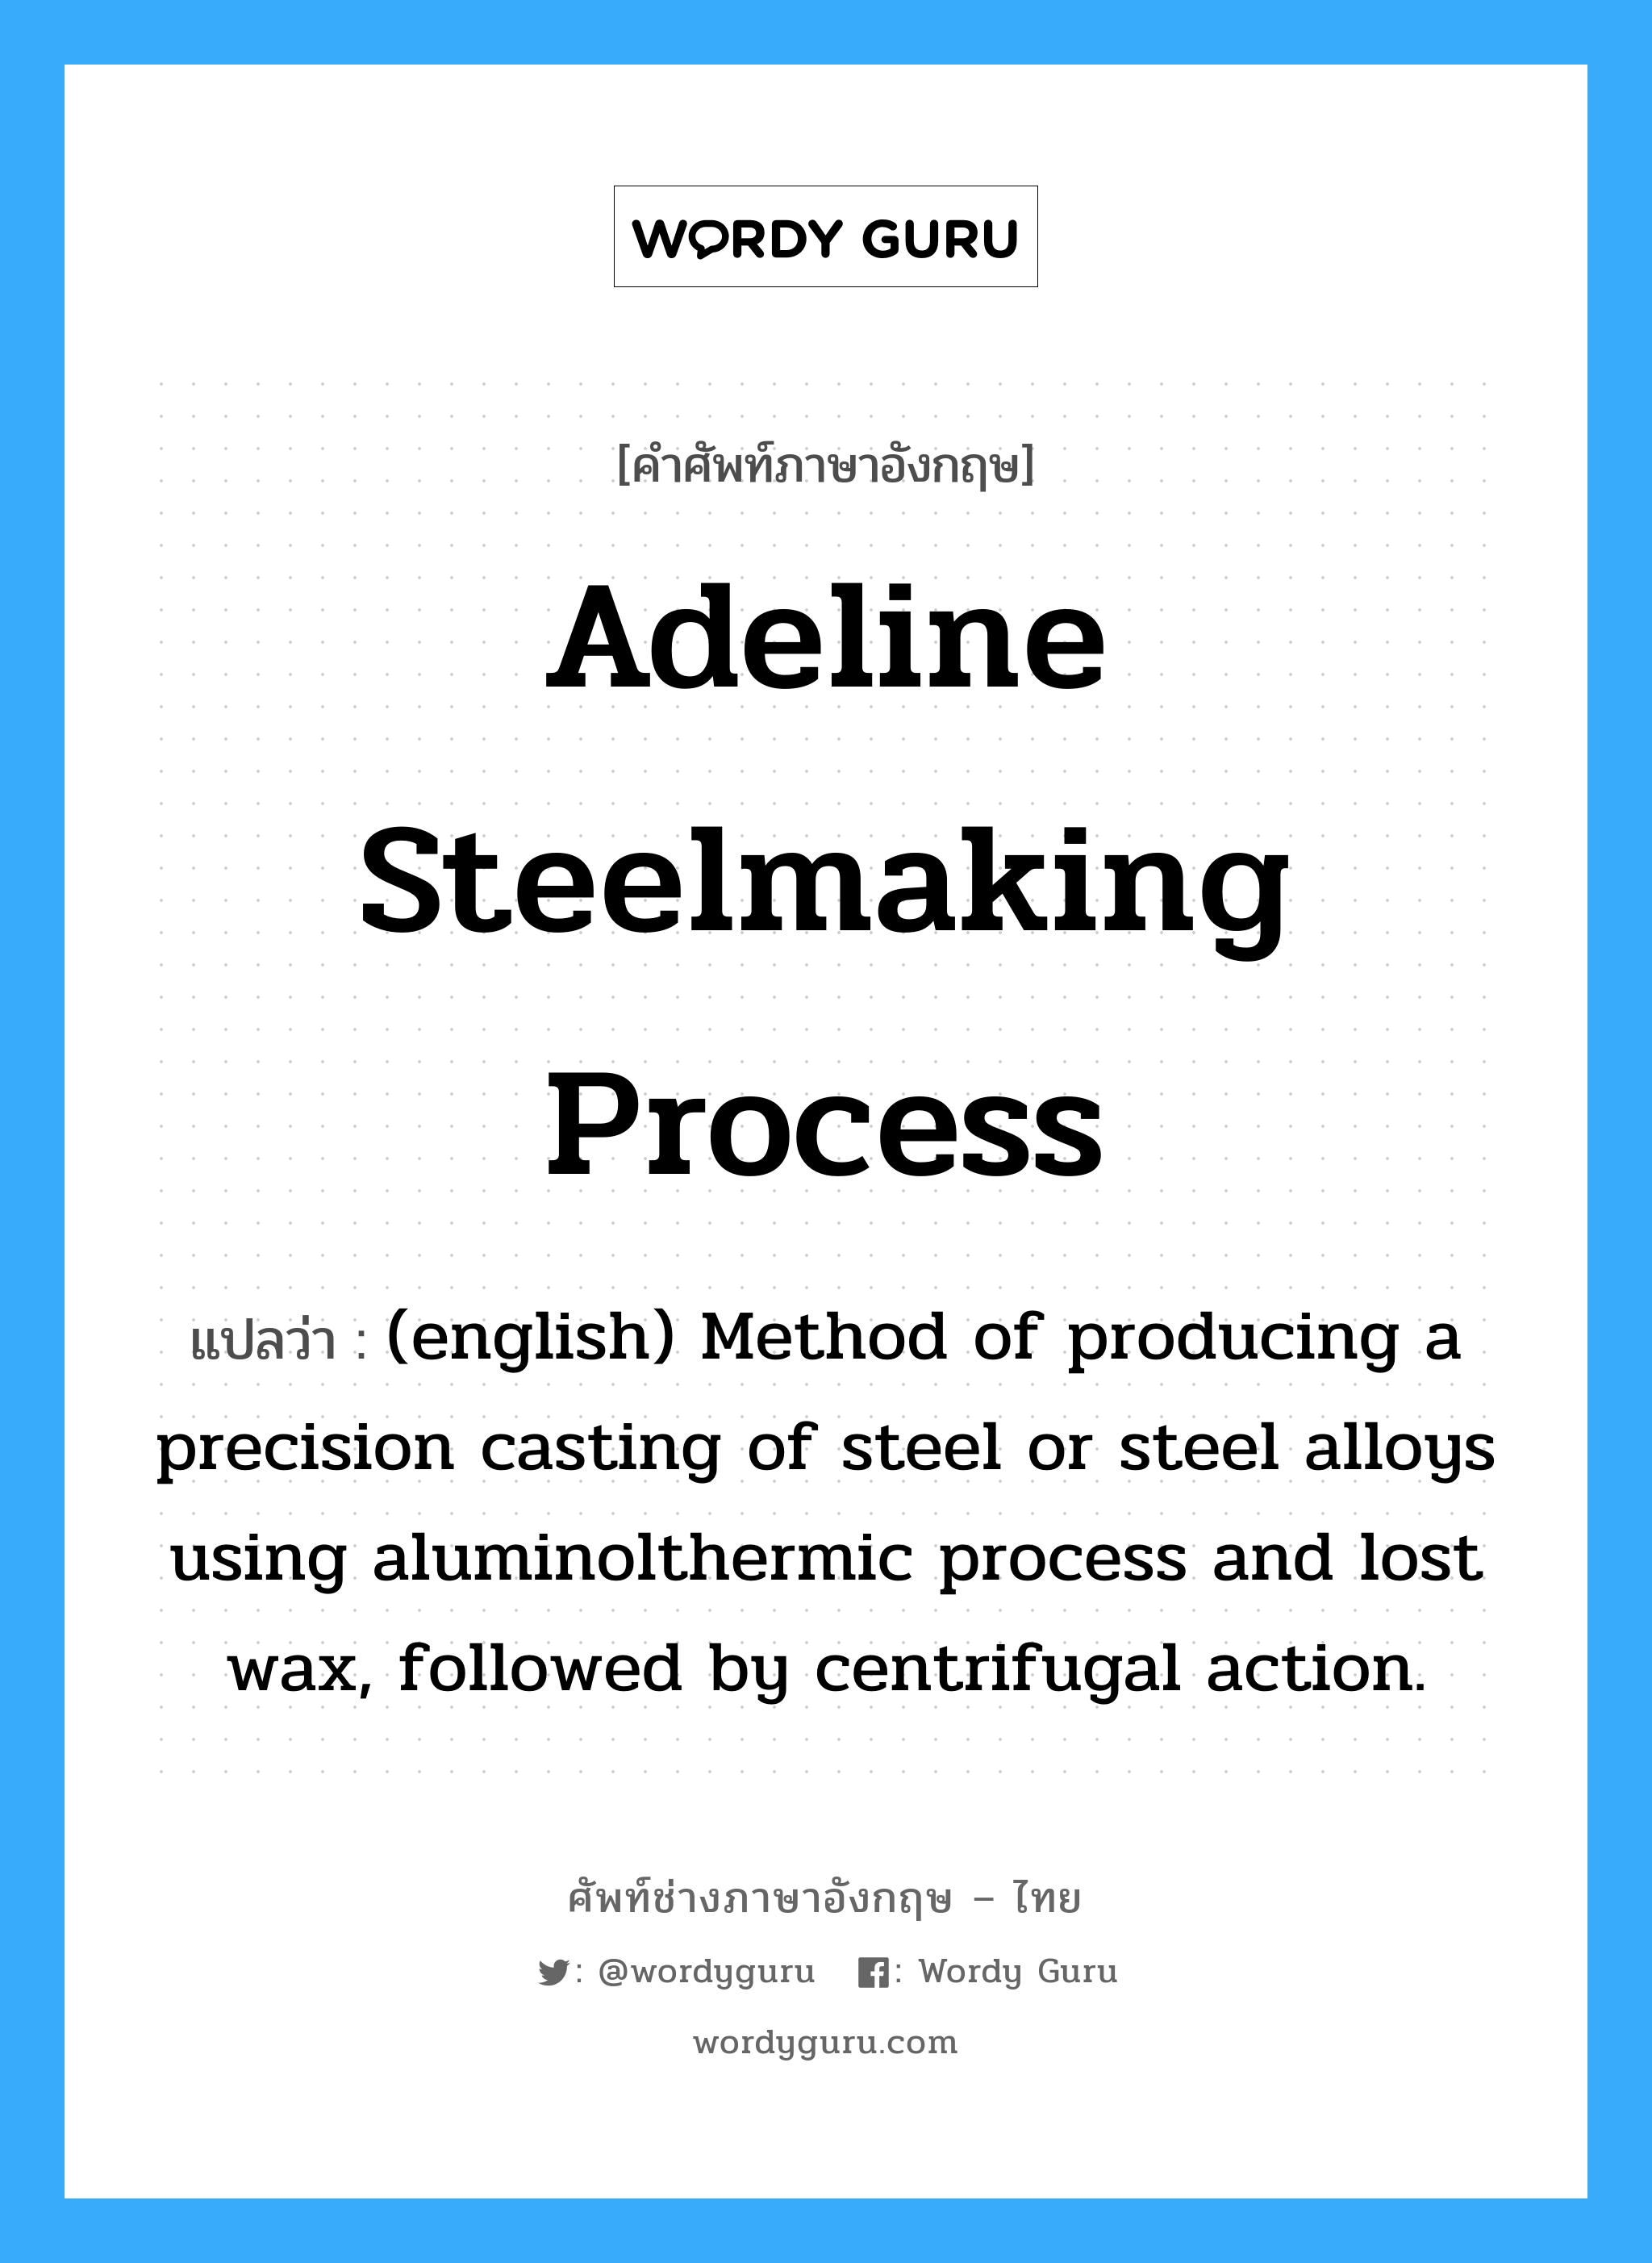 Adeline Steelmaking Process แปลว่า?, คำศัพท์ช่างภาษาอังกฤษ - ไทย Adeline Steelmaking Process คำศัพท์ภาษาอังกฤษ Adeline Steelmaking Process แปลว่า (english) Method of producing a precision casting of steel or steel alloys using aluminolthermic process and lost wax, followed by centrifugal action.